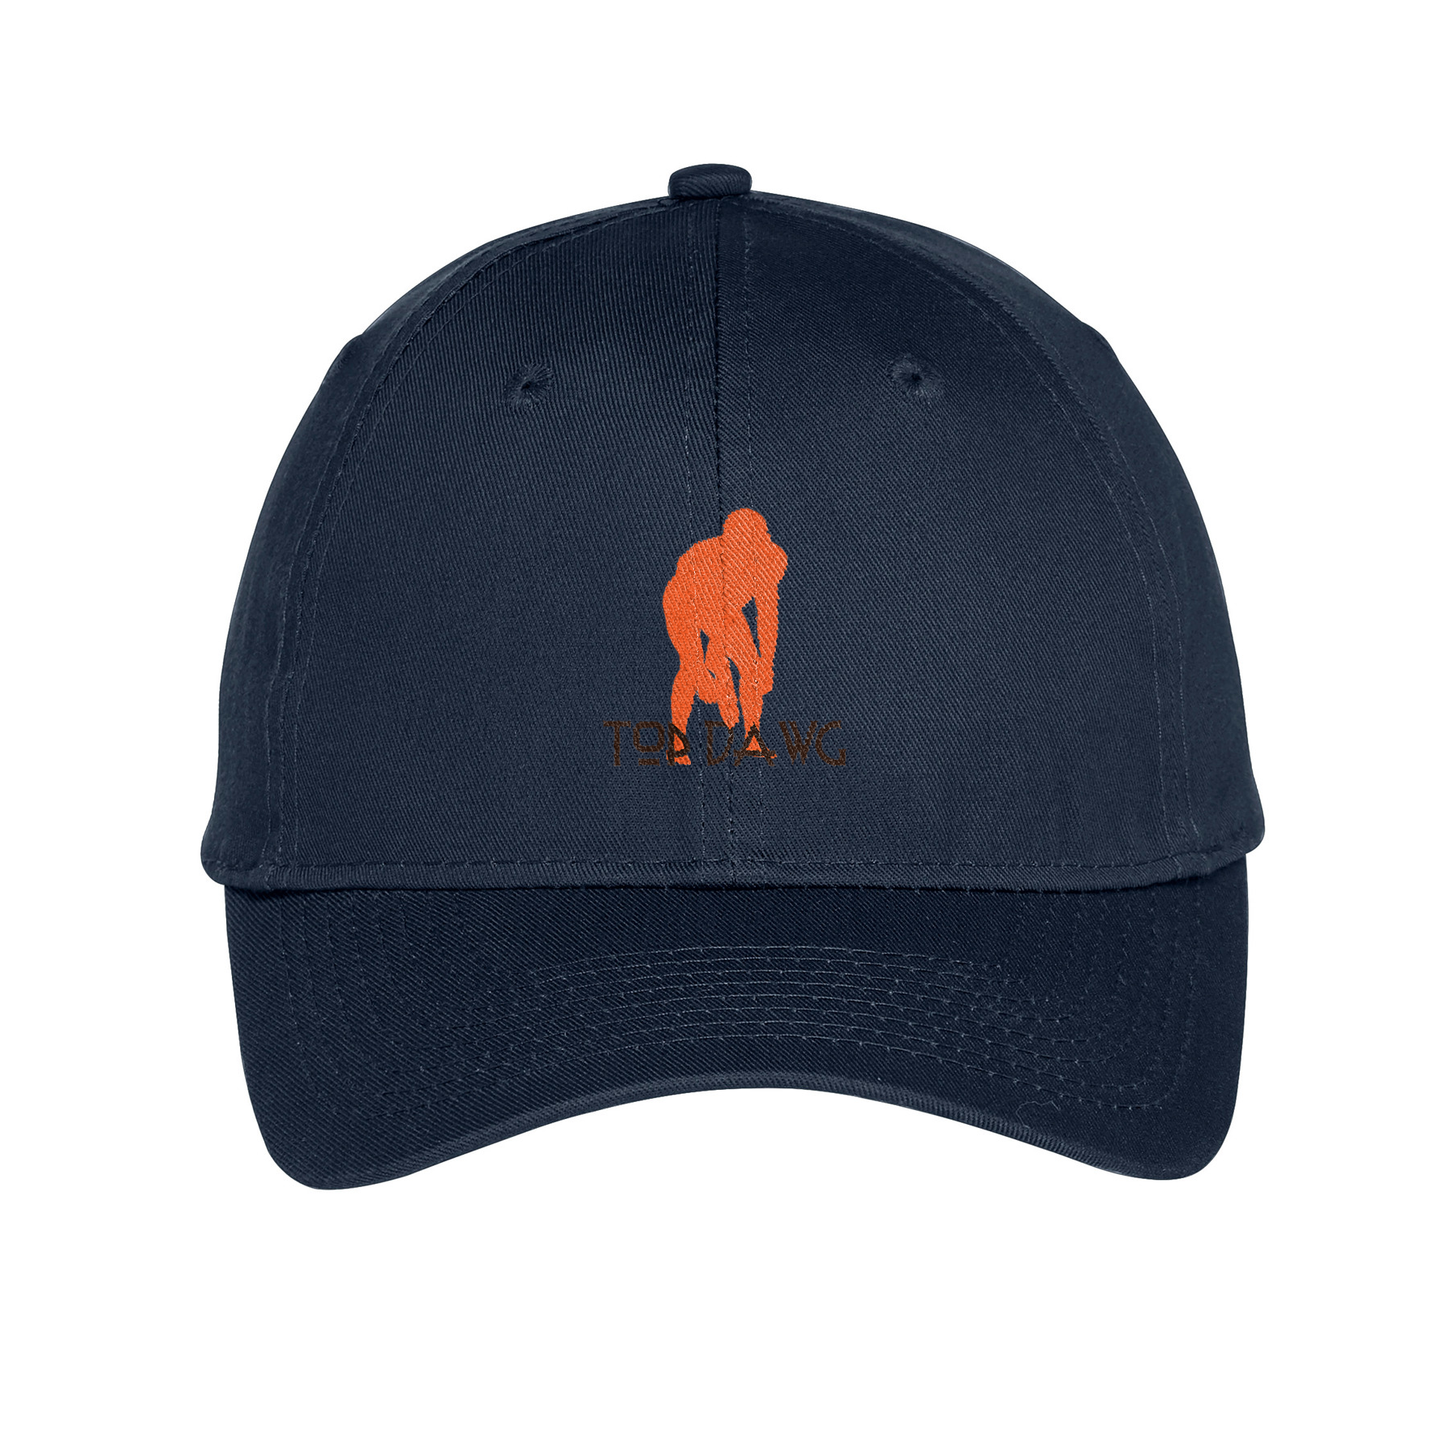 GT Top Dawg Embroidered Twill Cap